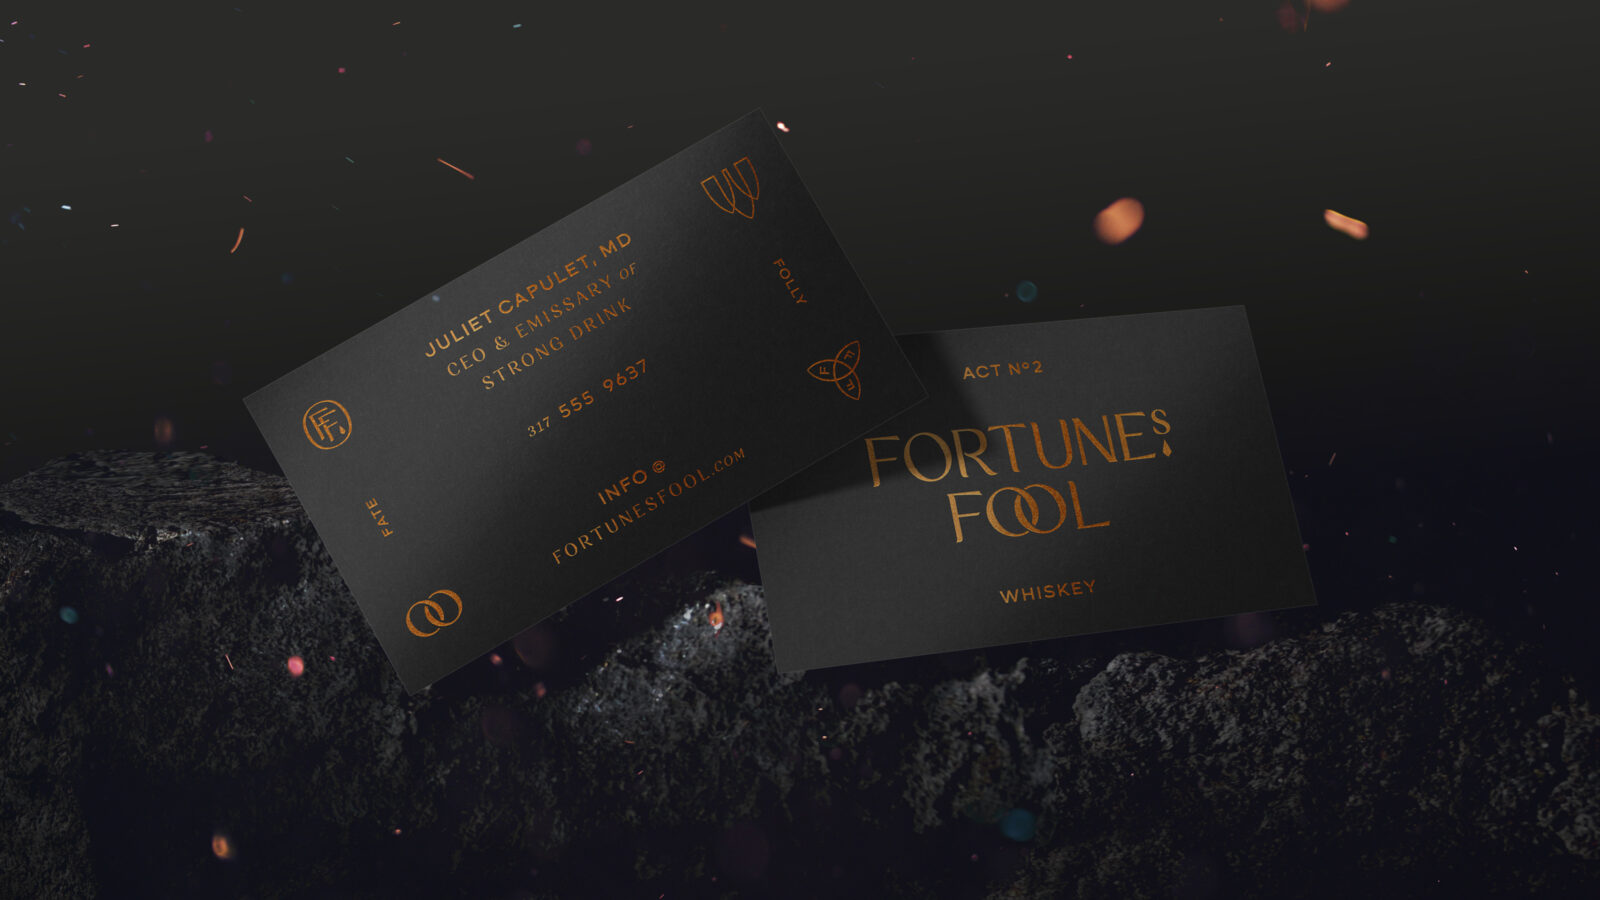 fortunes fool business card